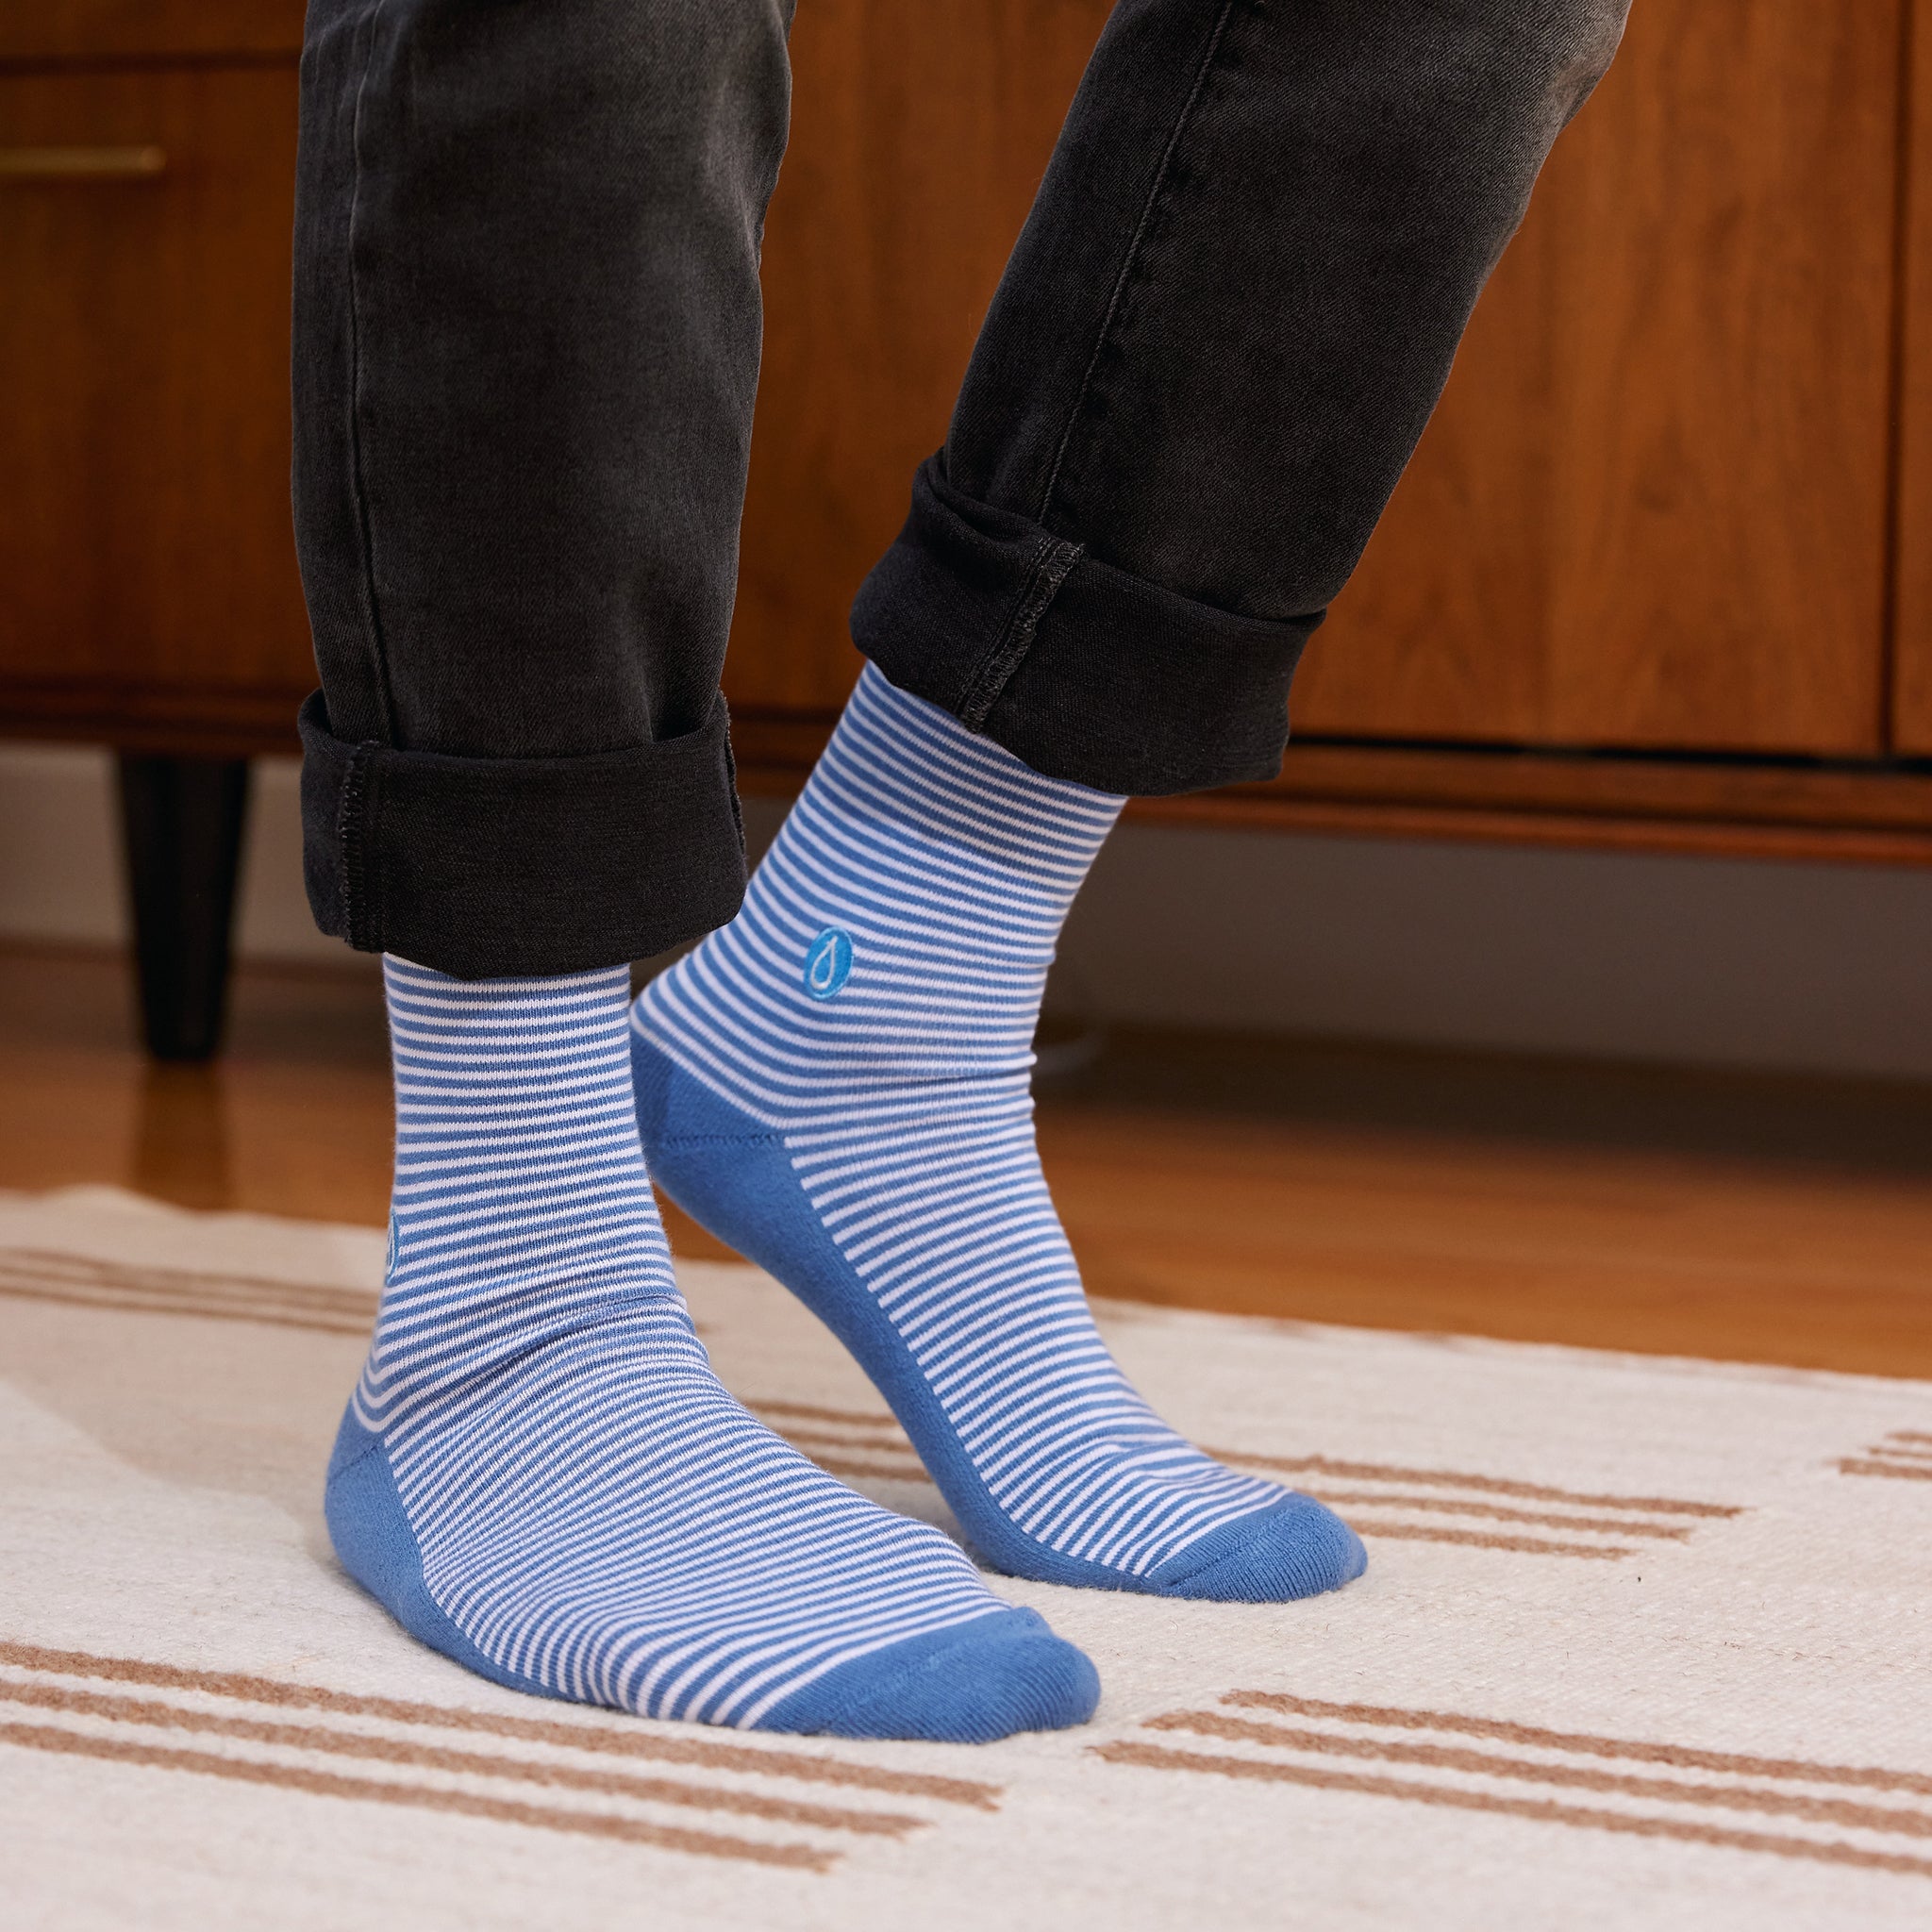 Socks that Give Water